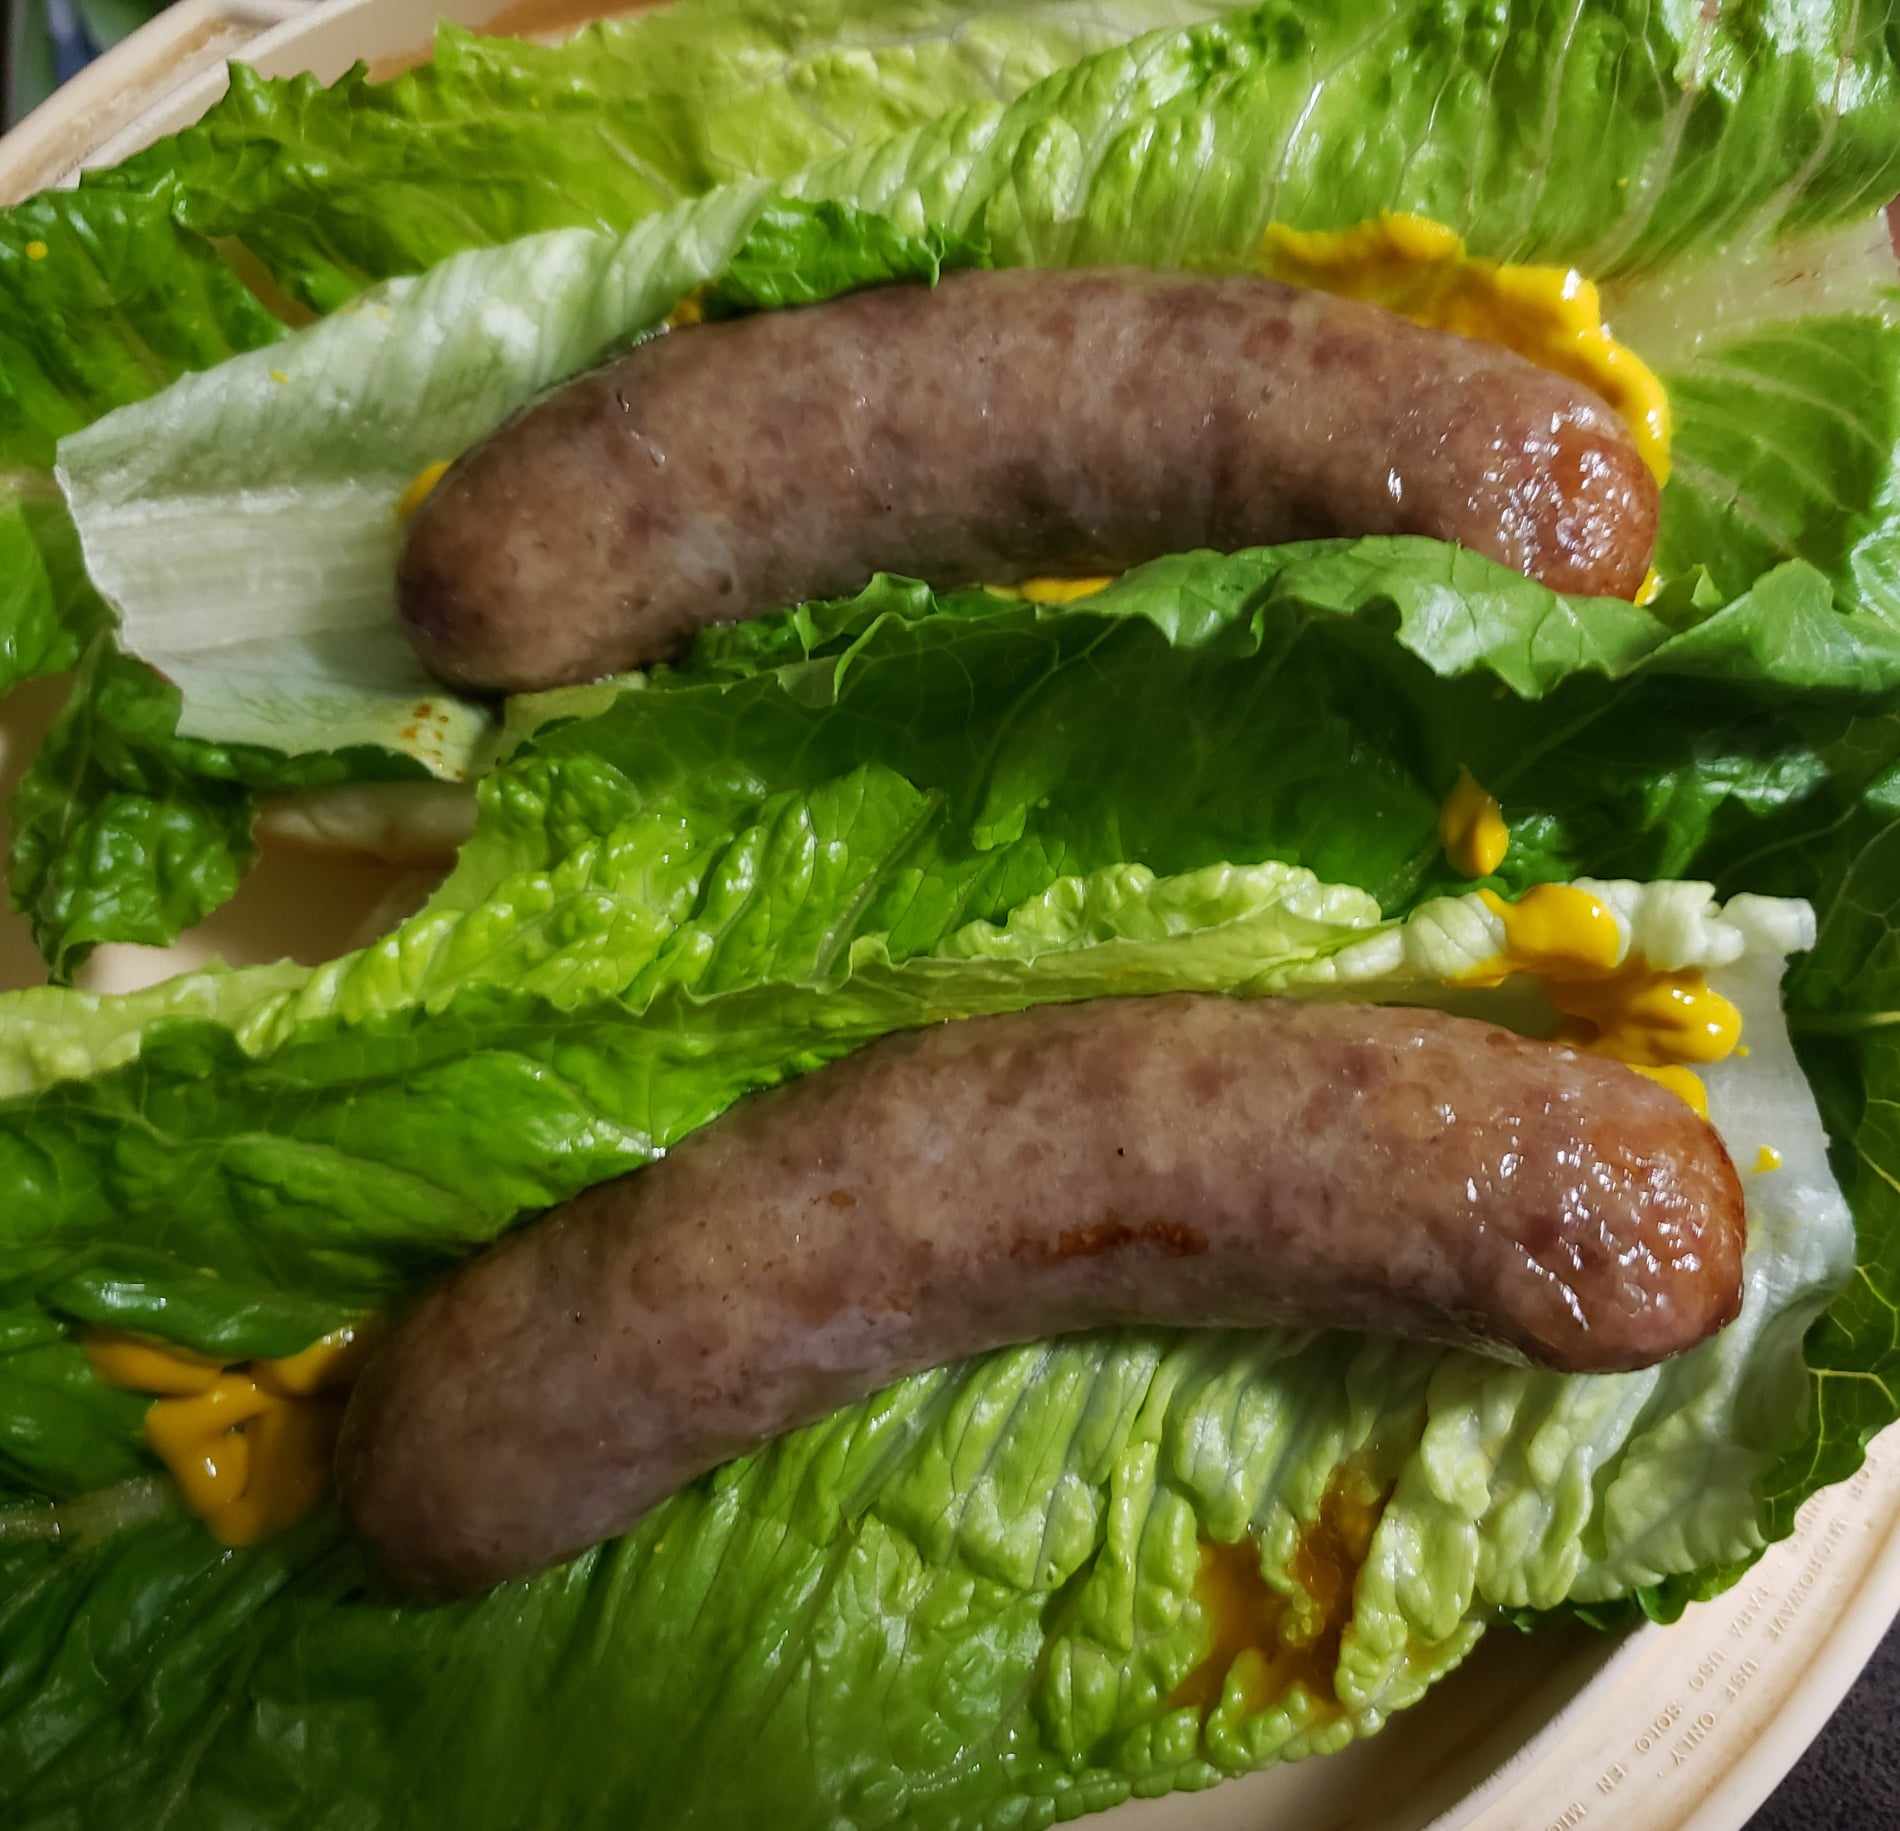 Brats wrapped in romaine lettuce with mustard on hotdog buns.